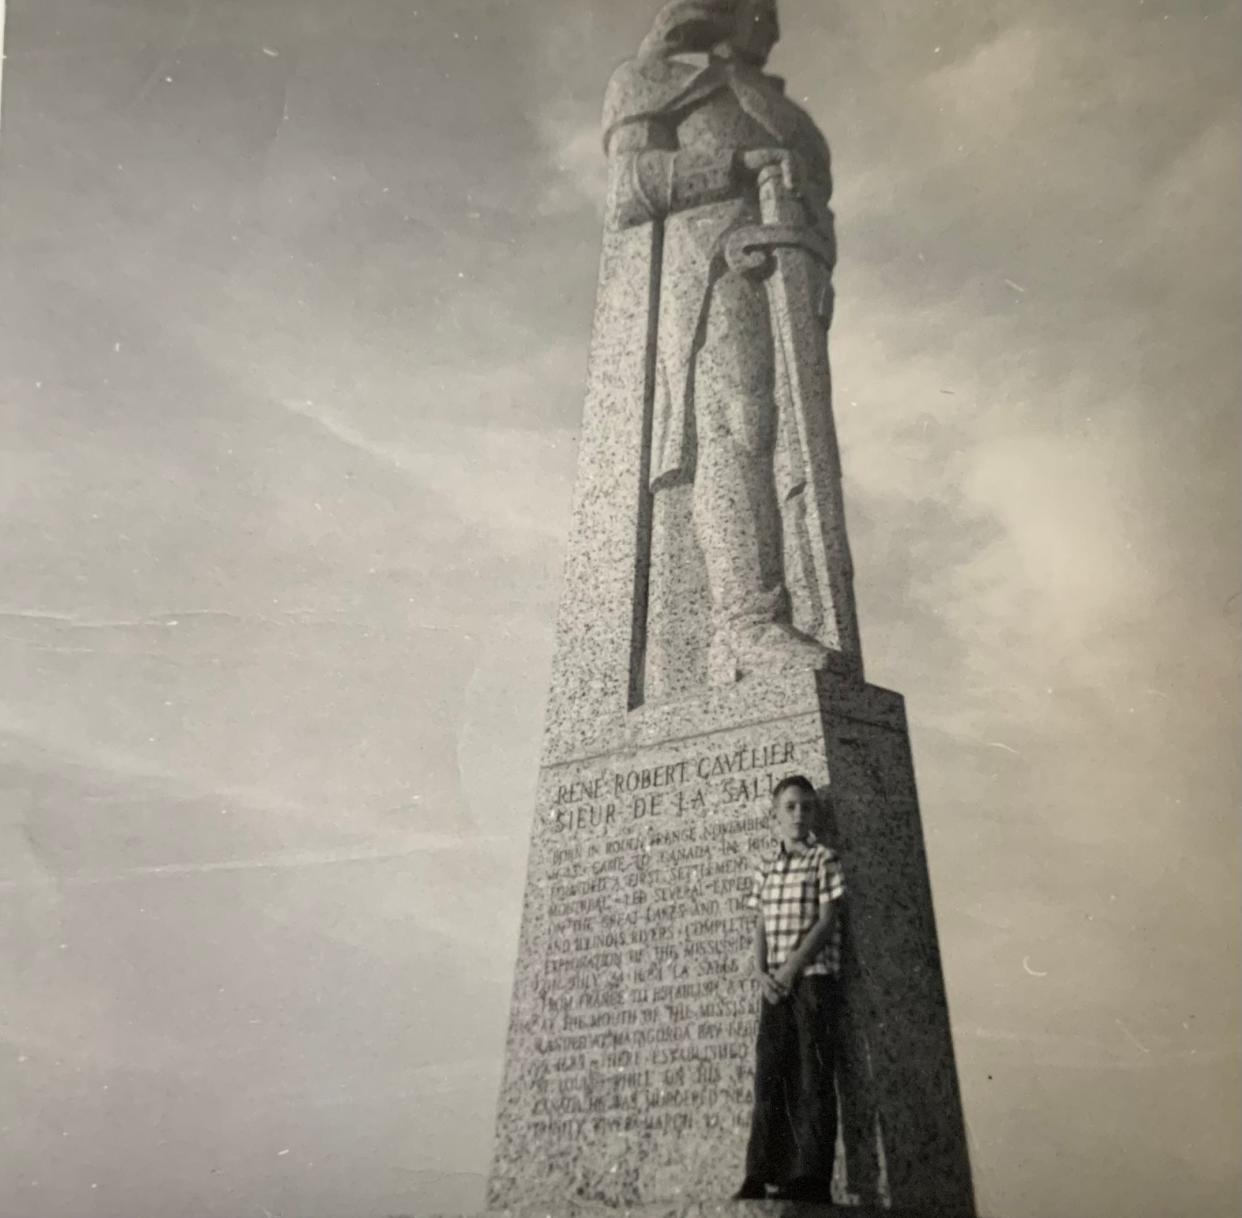 Think Texas columnist Michael Barnes on the pedestal of the La Salle statue, November 1963. At age 9, he was already smitten by Texas history and the romance of twice-obliterated Indianola.